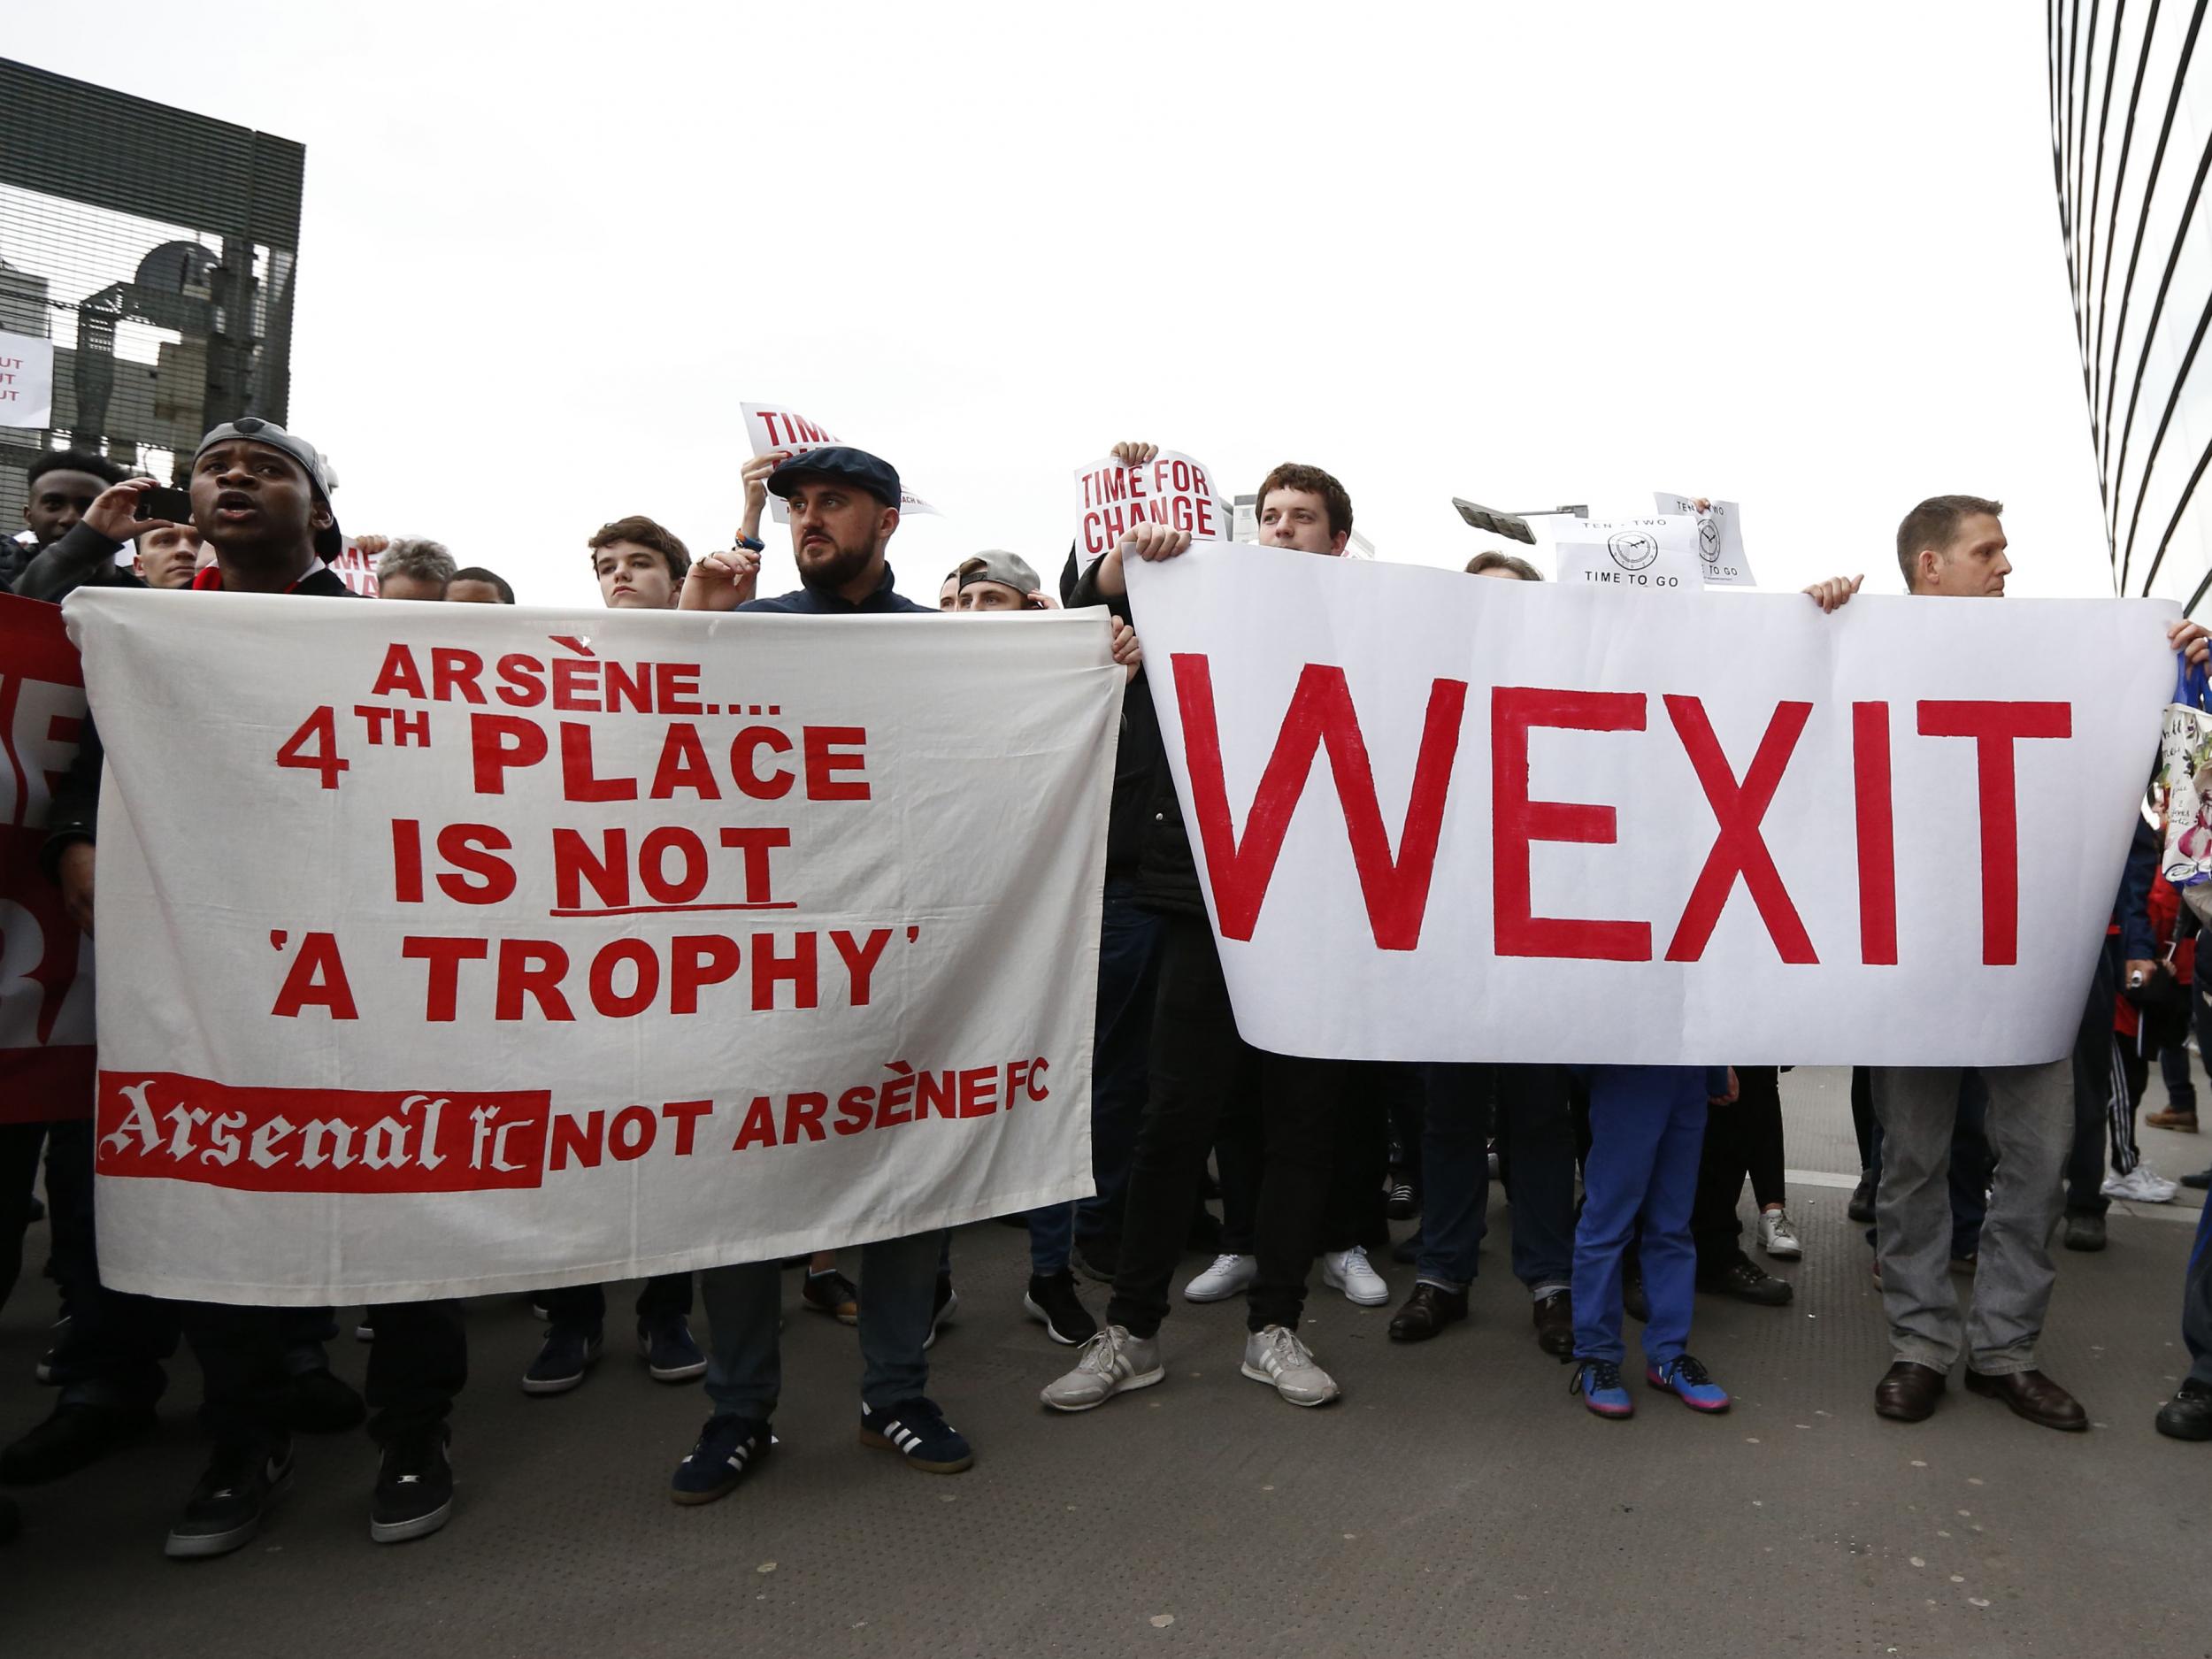 Arsenal supporters continued their protests against Wenger at the match